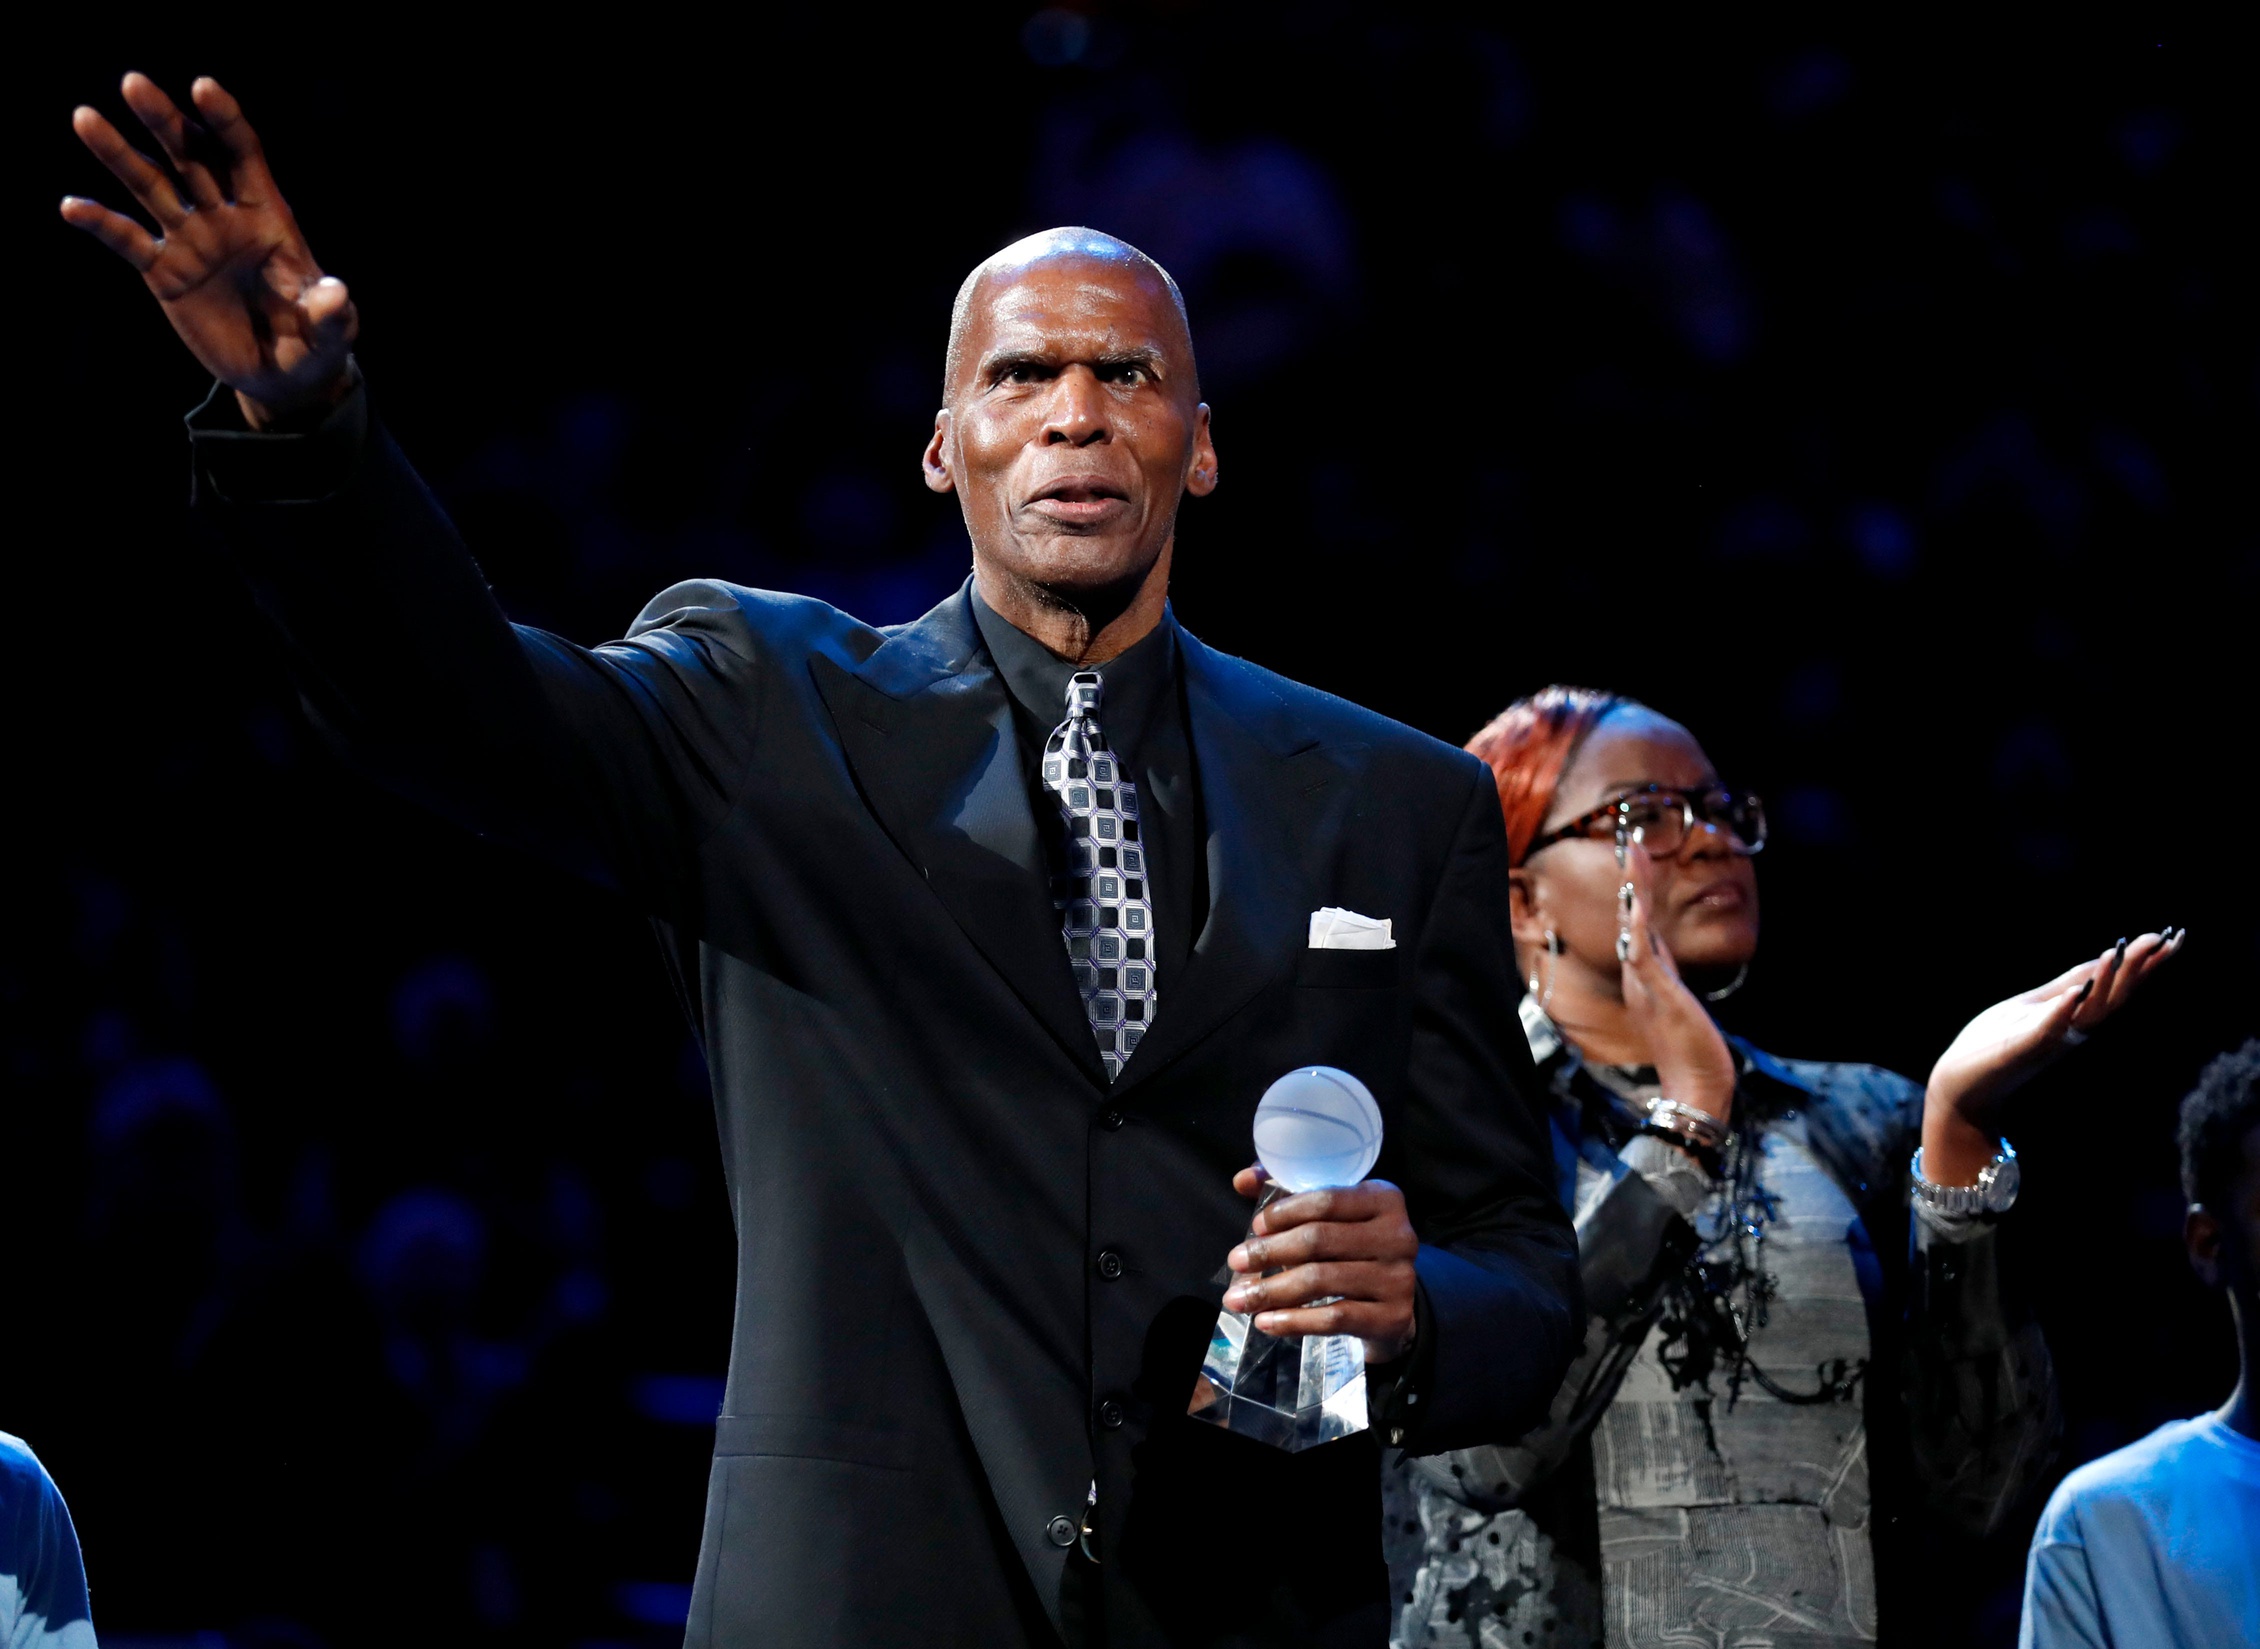 Robert Parish waves to the crowd after receiving the Sports Legacy Award on Monday, Jan. 20, 2020, before a game between the Grizzlies and Pelicans at the FedExForum in downtown Memphis.